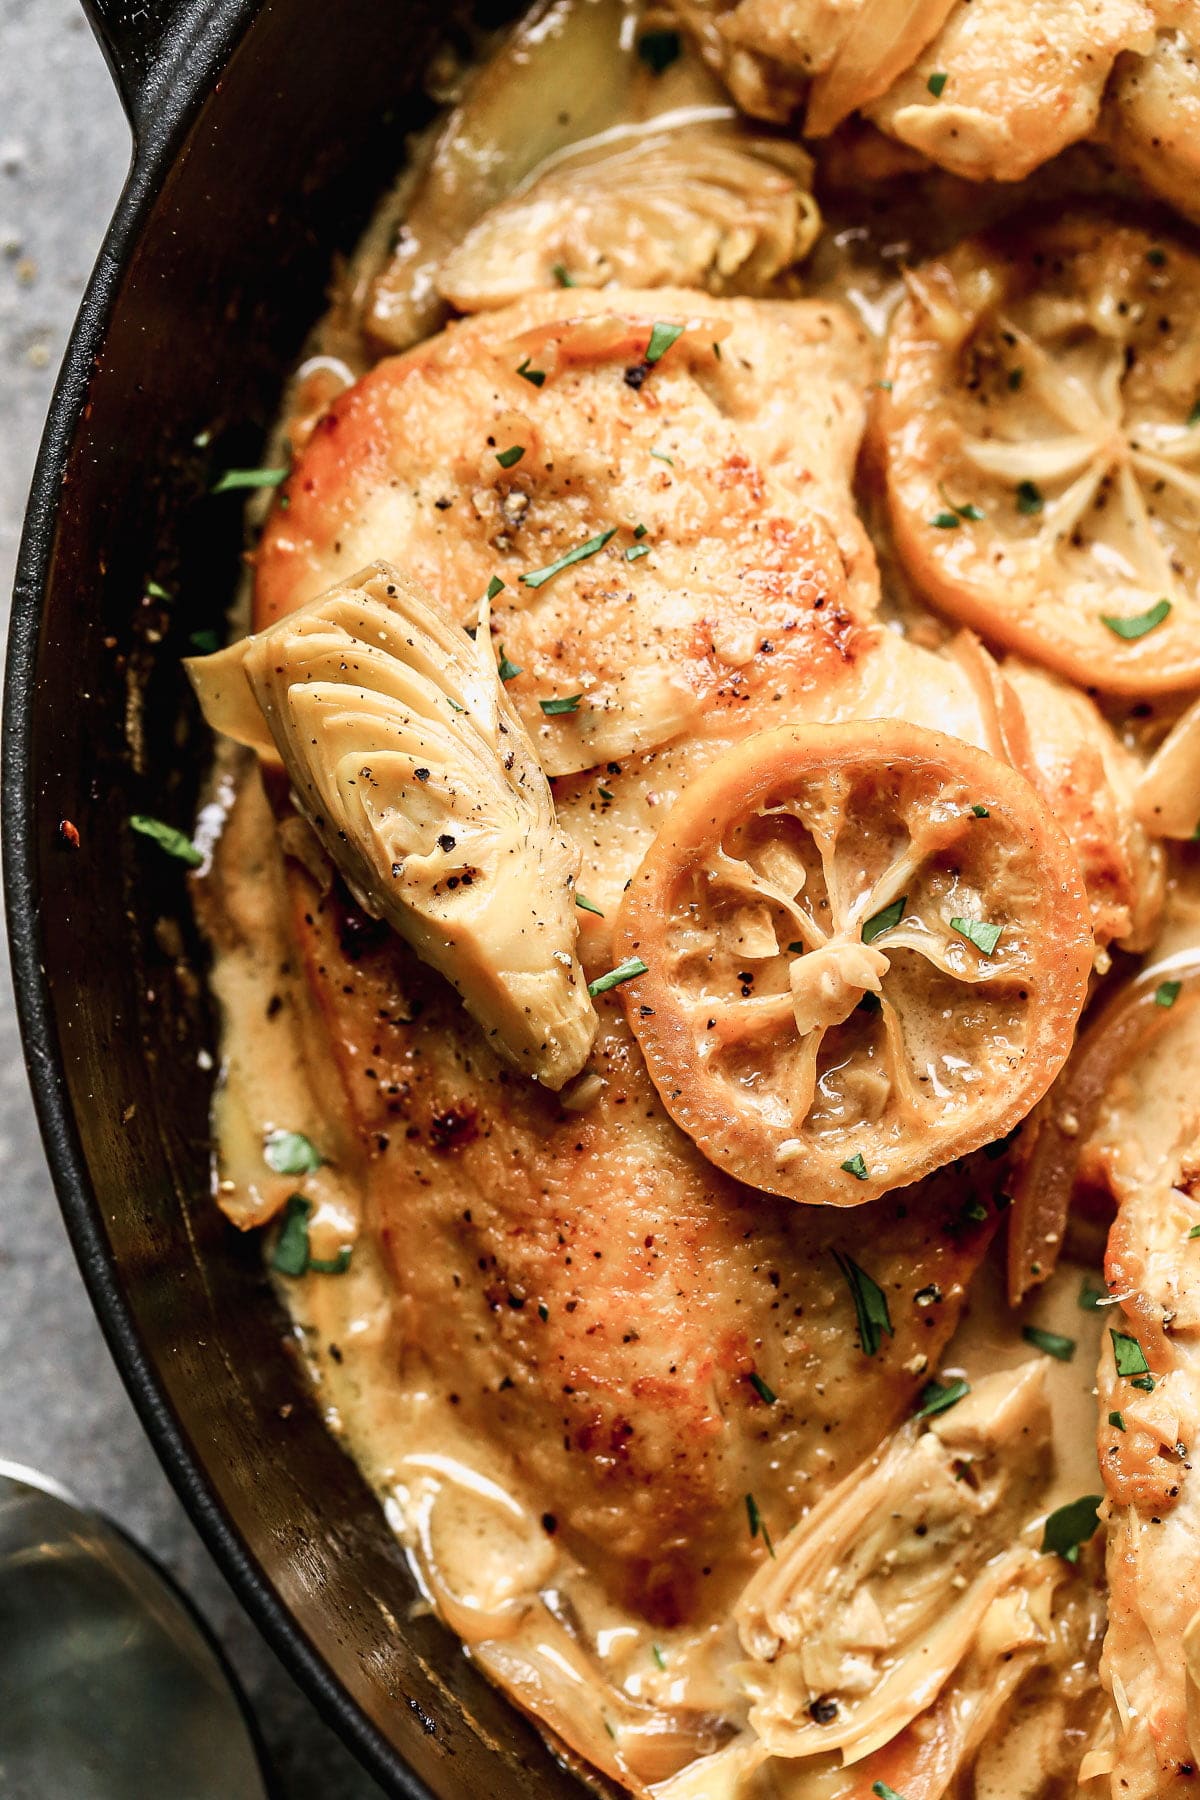 Swimming in a luscious lemon-infused wine sauce and studded with briny artichokes and sweet caramelized onions, our Chicken with Artichokes is the perfect bright springy dish to whip up when we also need a little cozy for those curve ball cold days we all get this time of year.&nbsp;